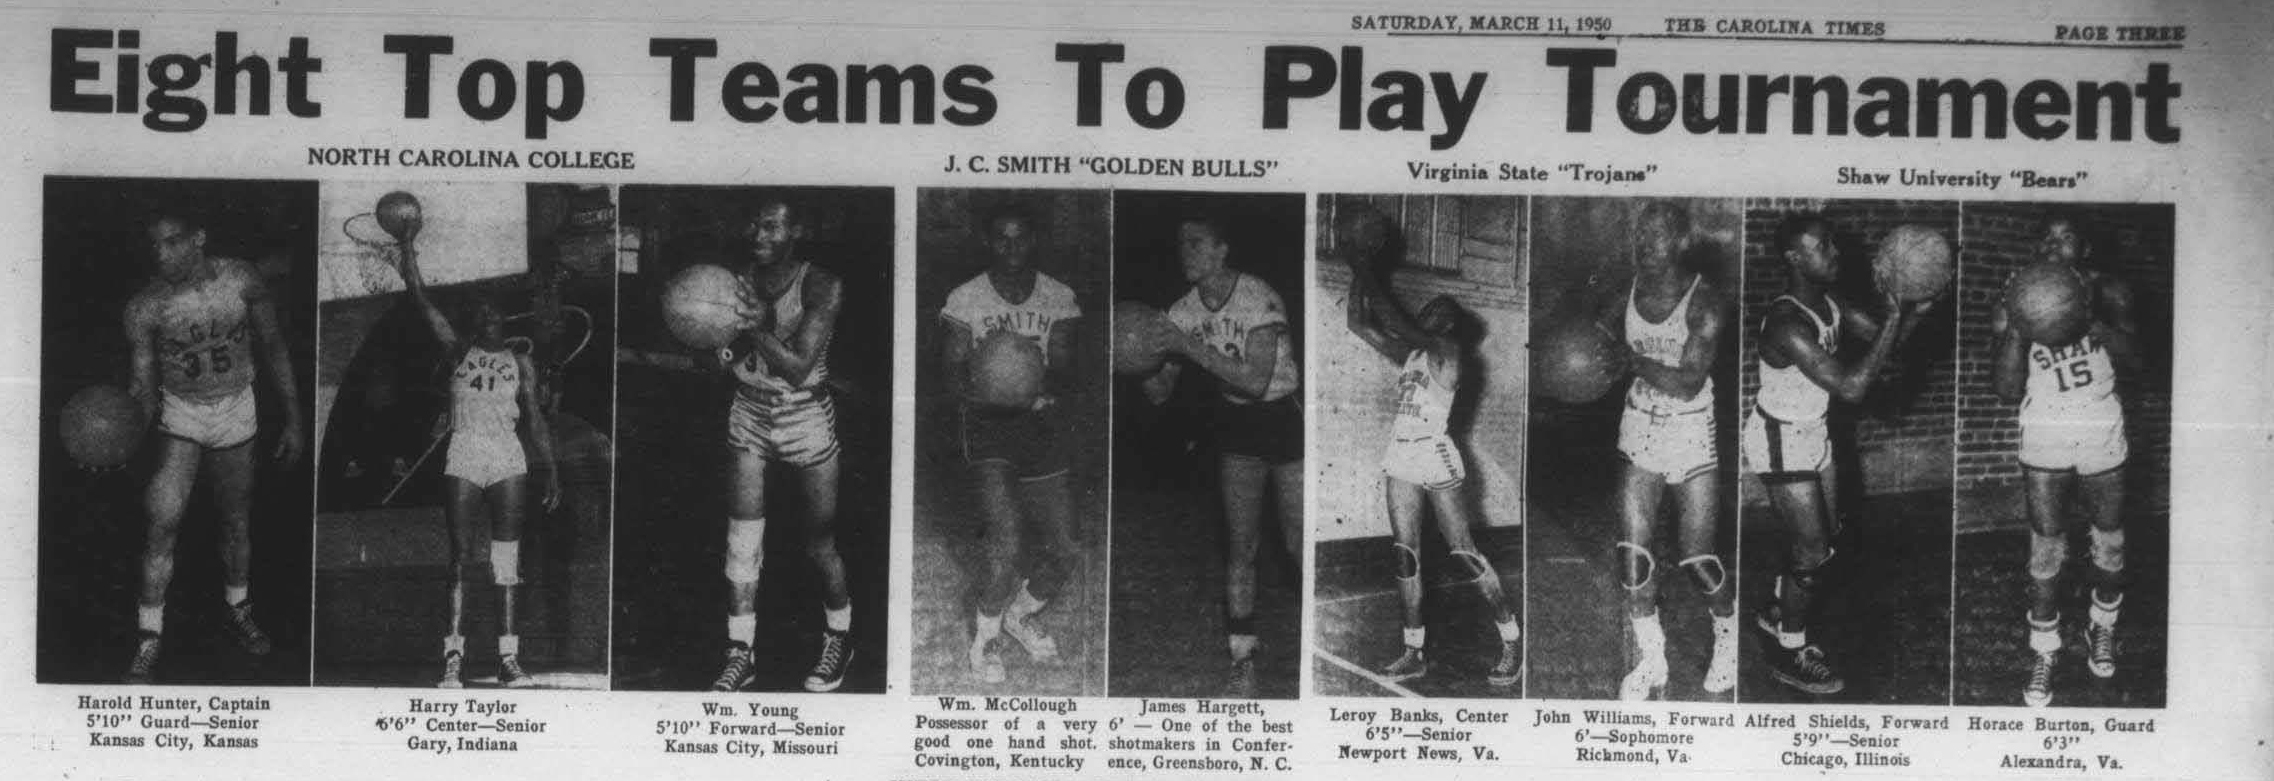 Photos of the top basketball players to play in the 1950 CIAA tournament